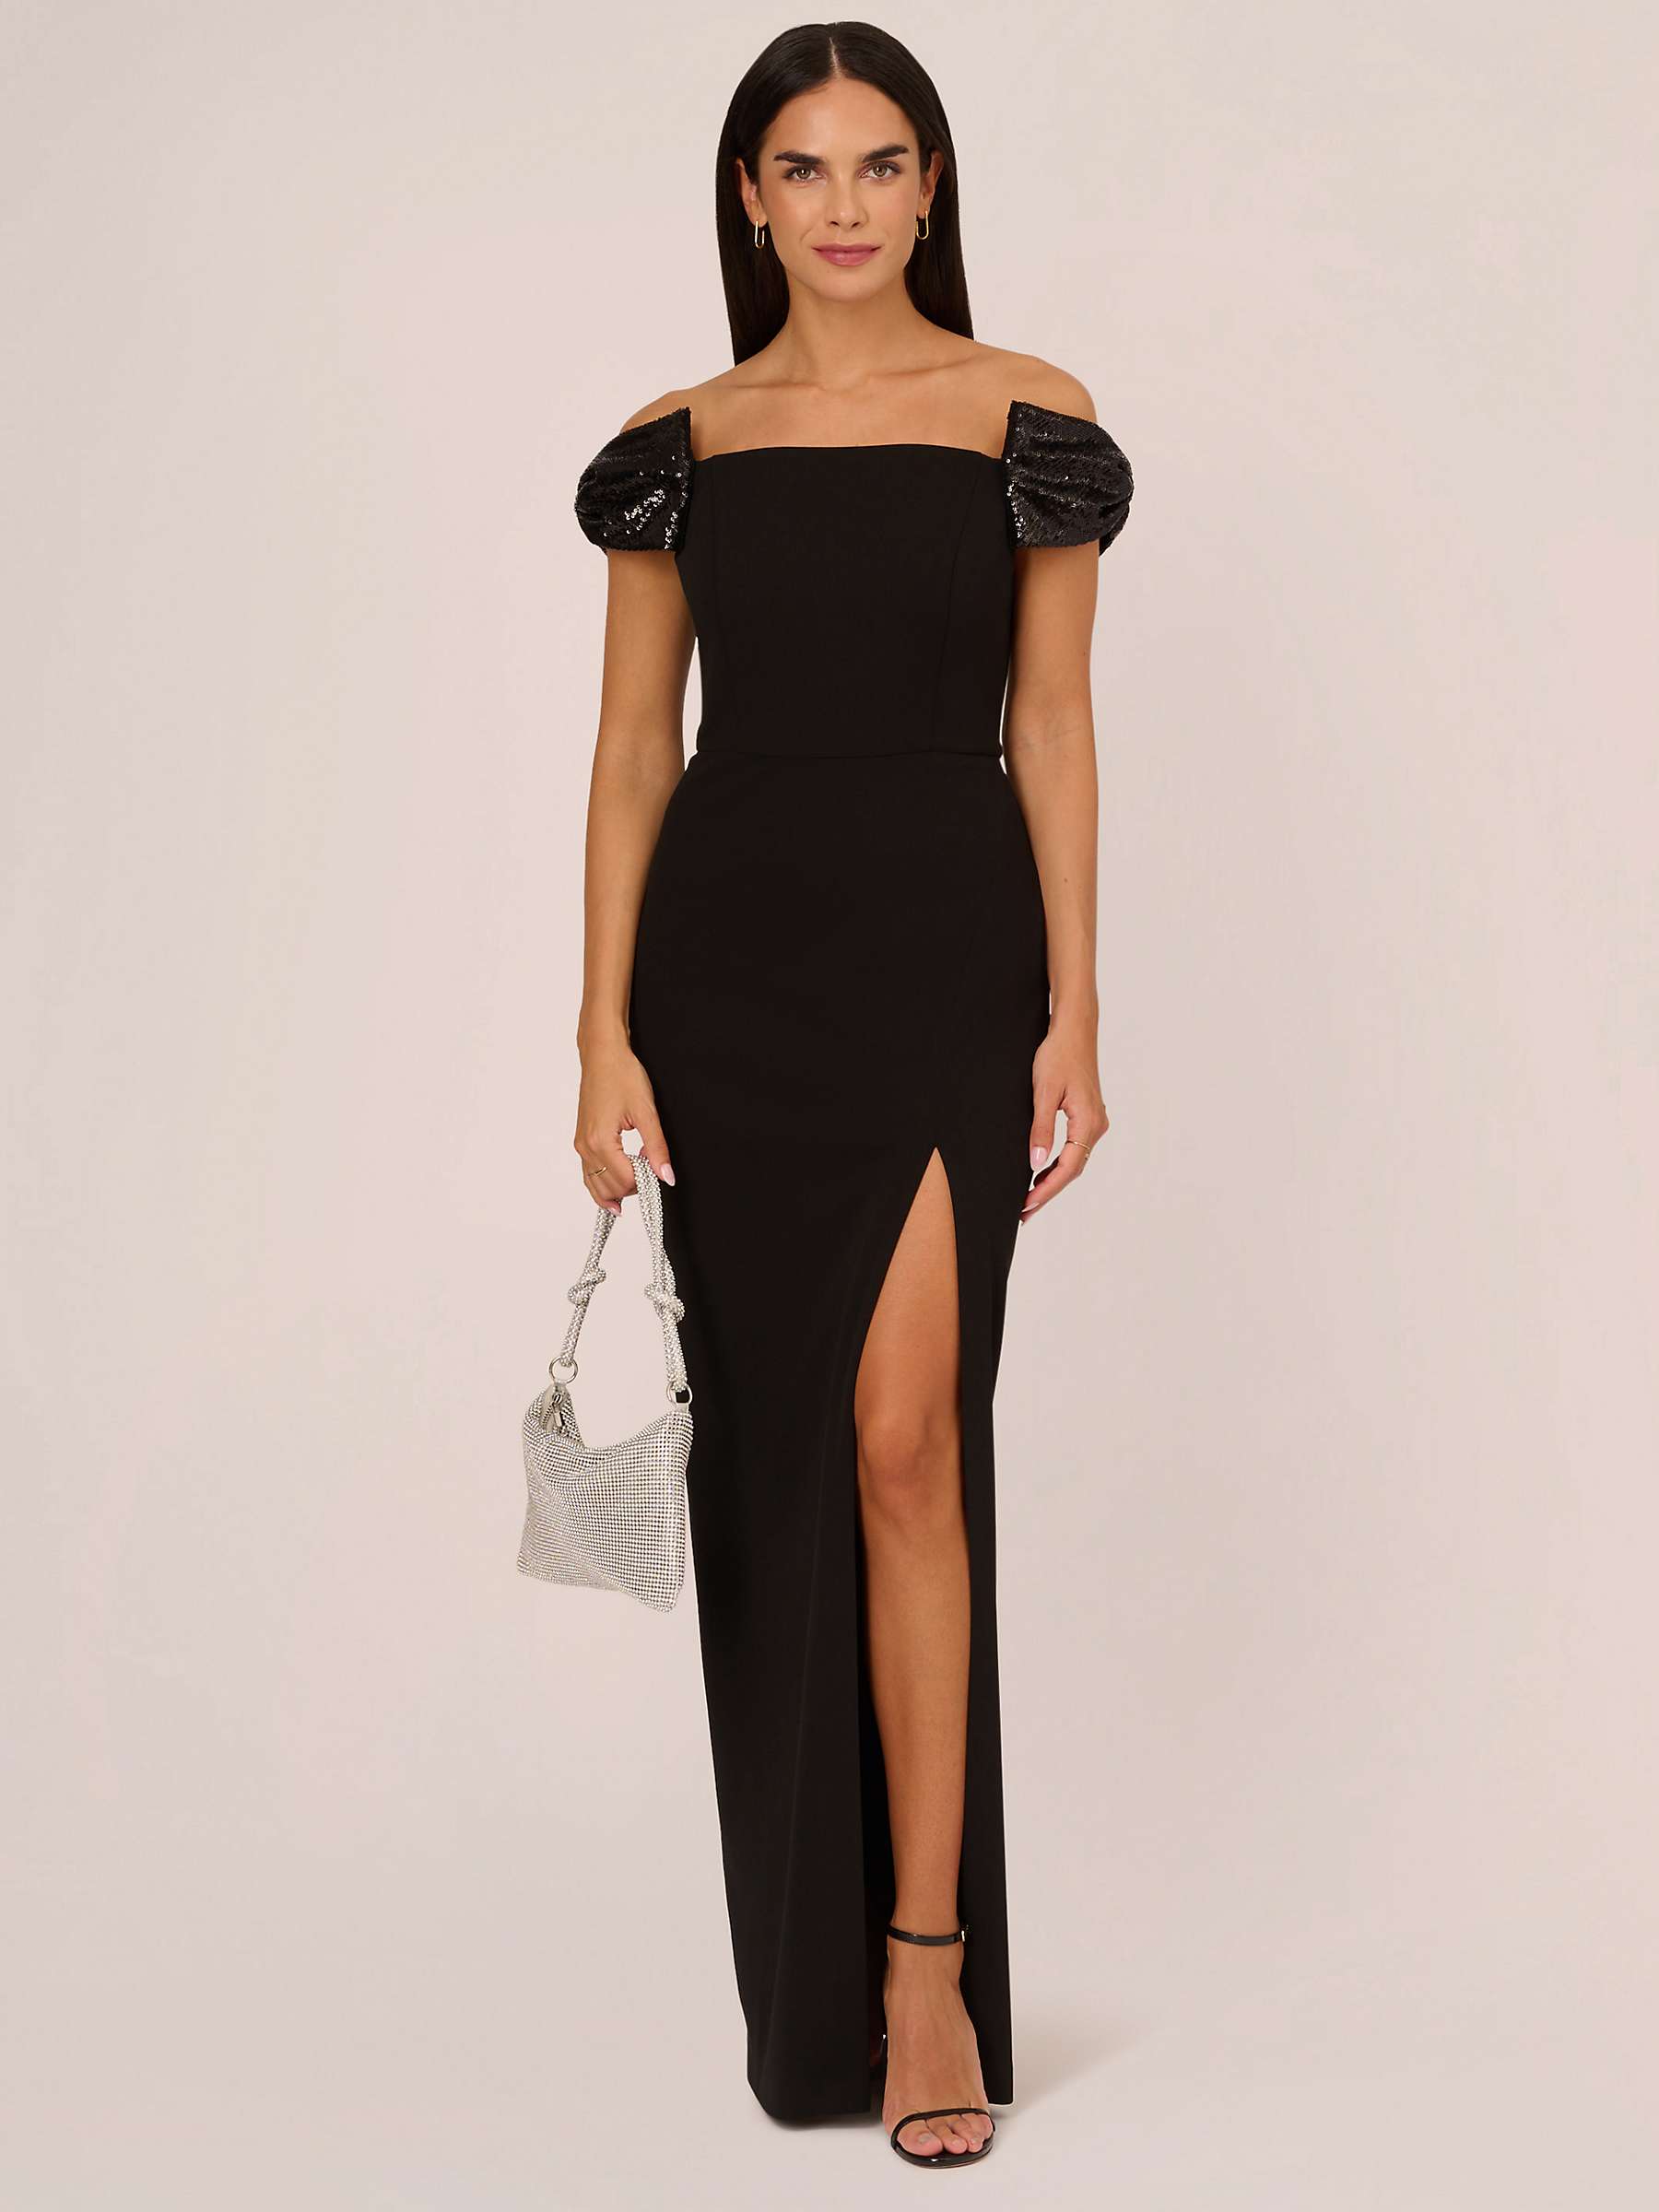 Buy Aidan by Adrianna Papell Stretch Knit Crepe Maxi Dress, Black Online at johnlewis.com